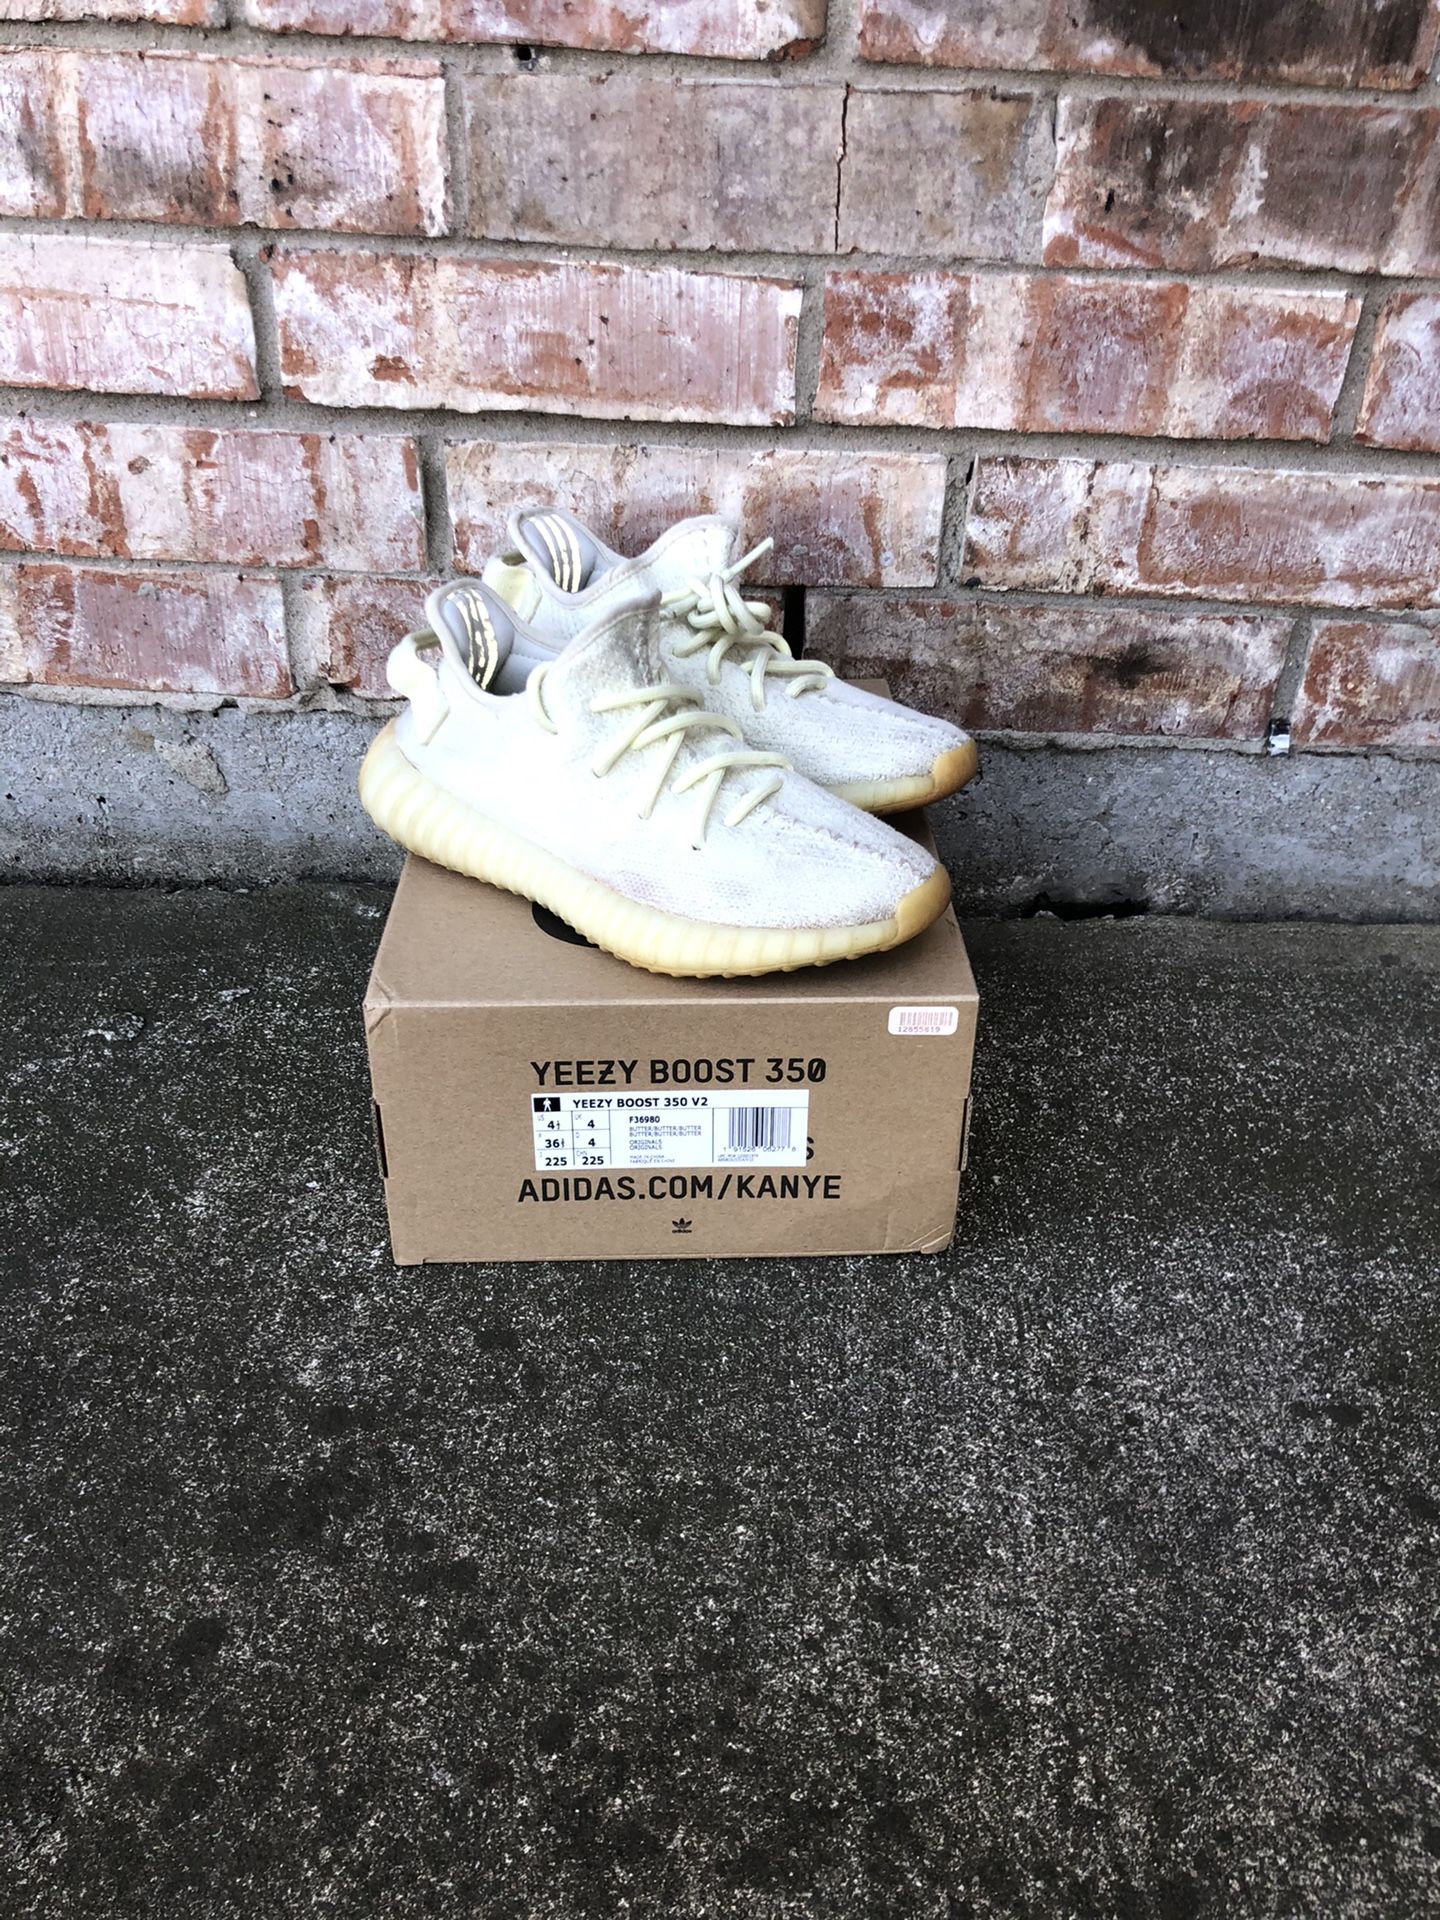 Adidas Yeezy Boost 350 Butters